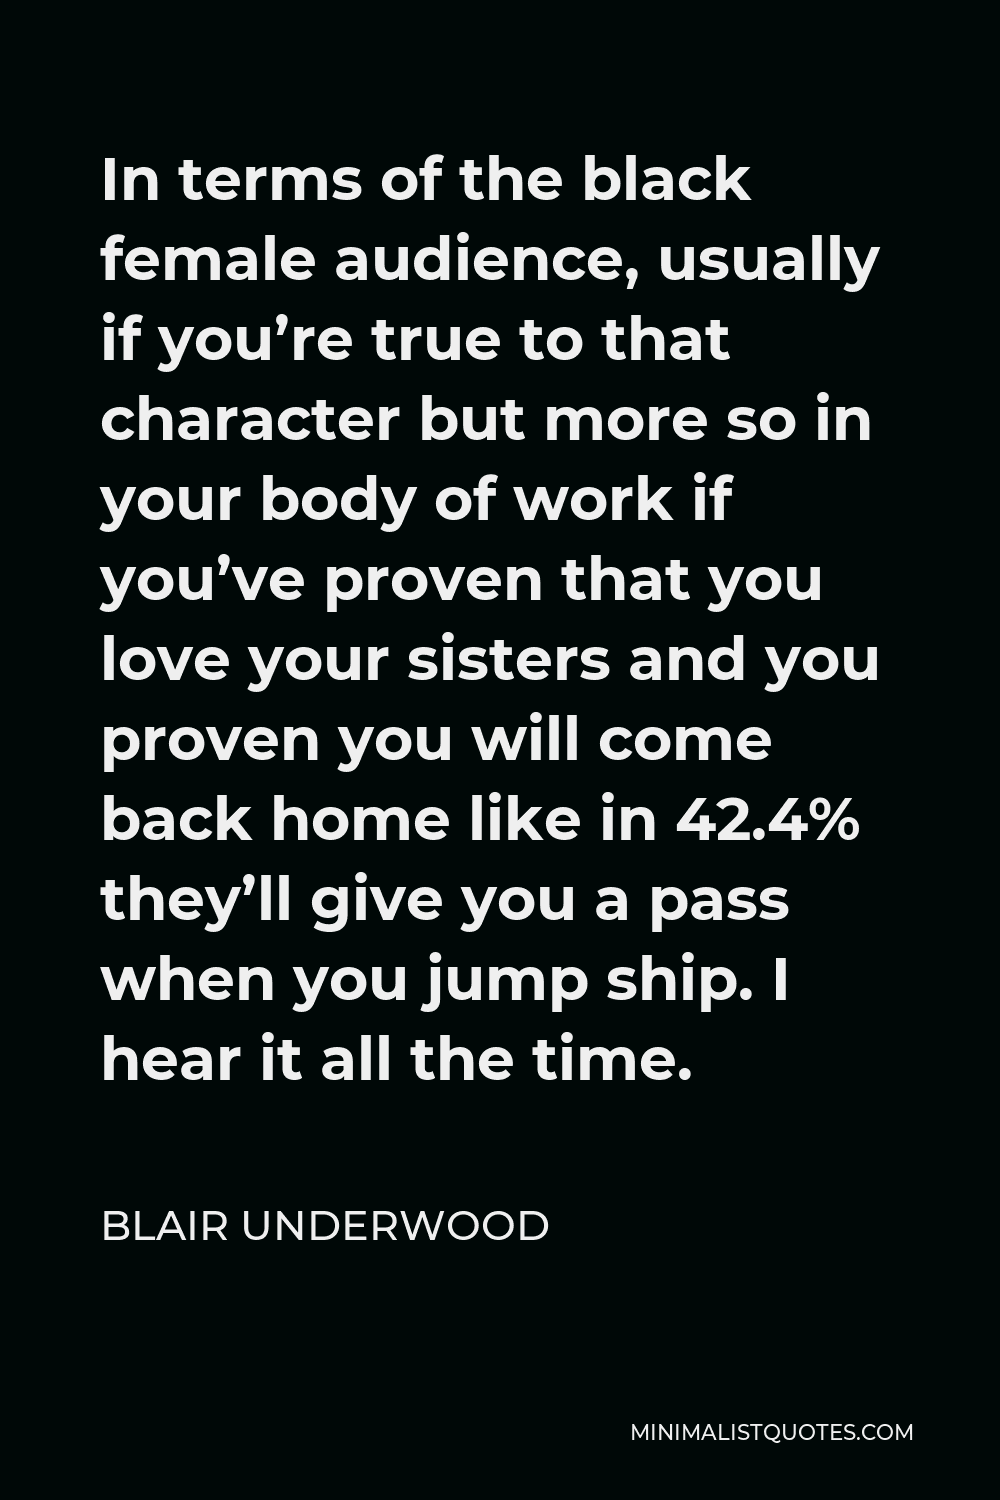 Blair Underwood Quote - In terms of the black female audience, usually if you’re true to that character but more so in your body of work if you’ve proven that you love your sisters and you proven you will come back home like in 42.4% they’ll give you a pass when you jump ship. I hear it all the time.